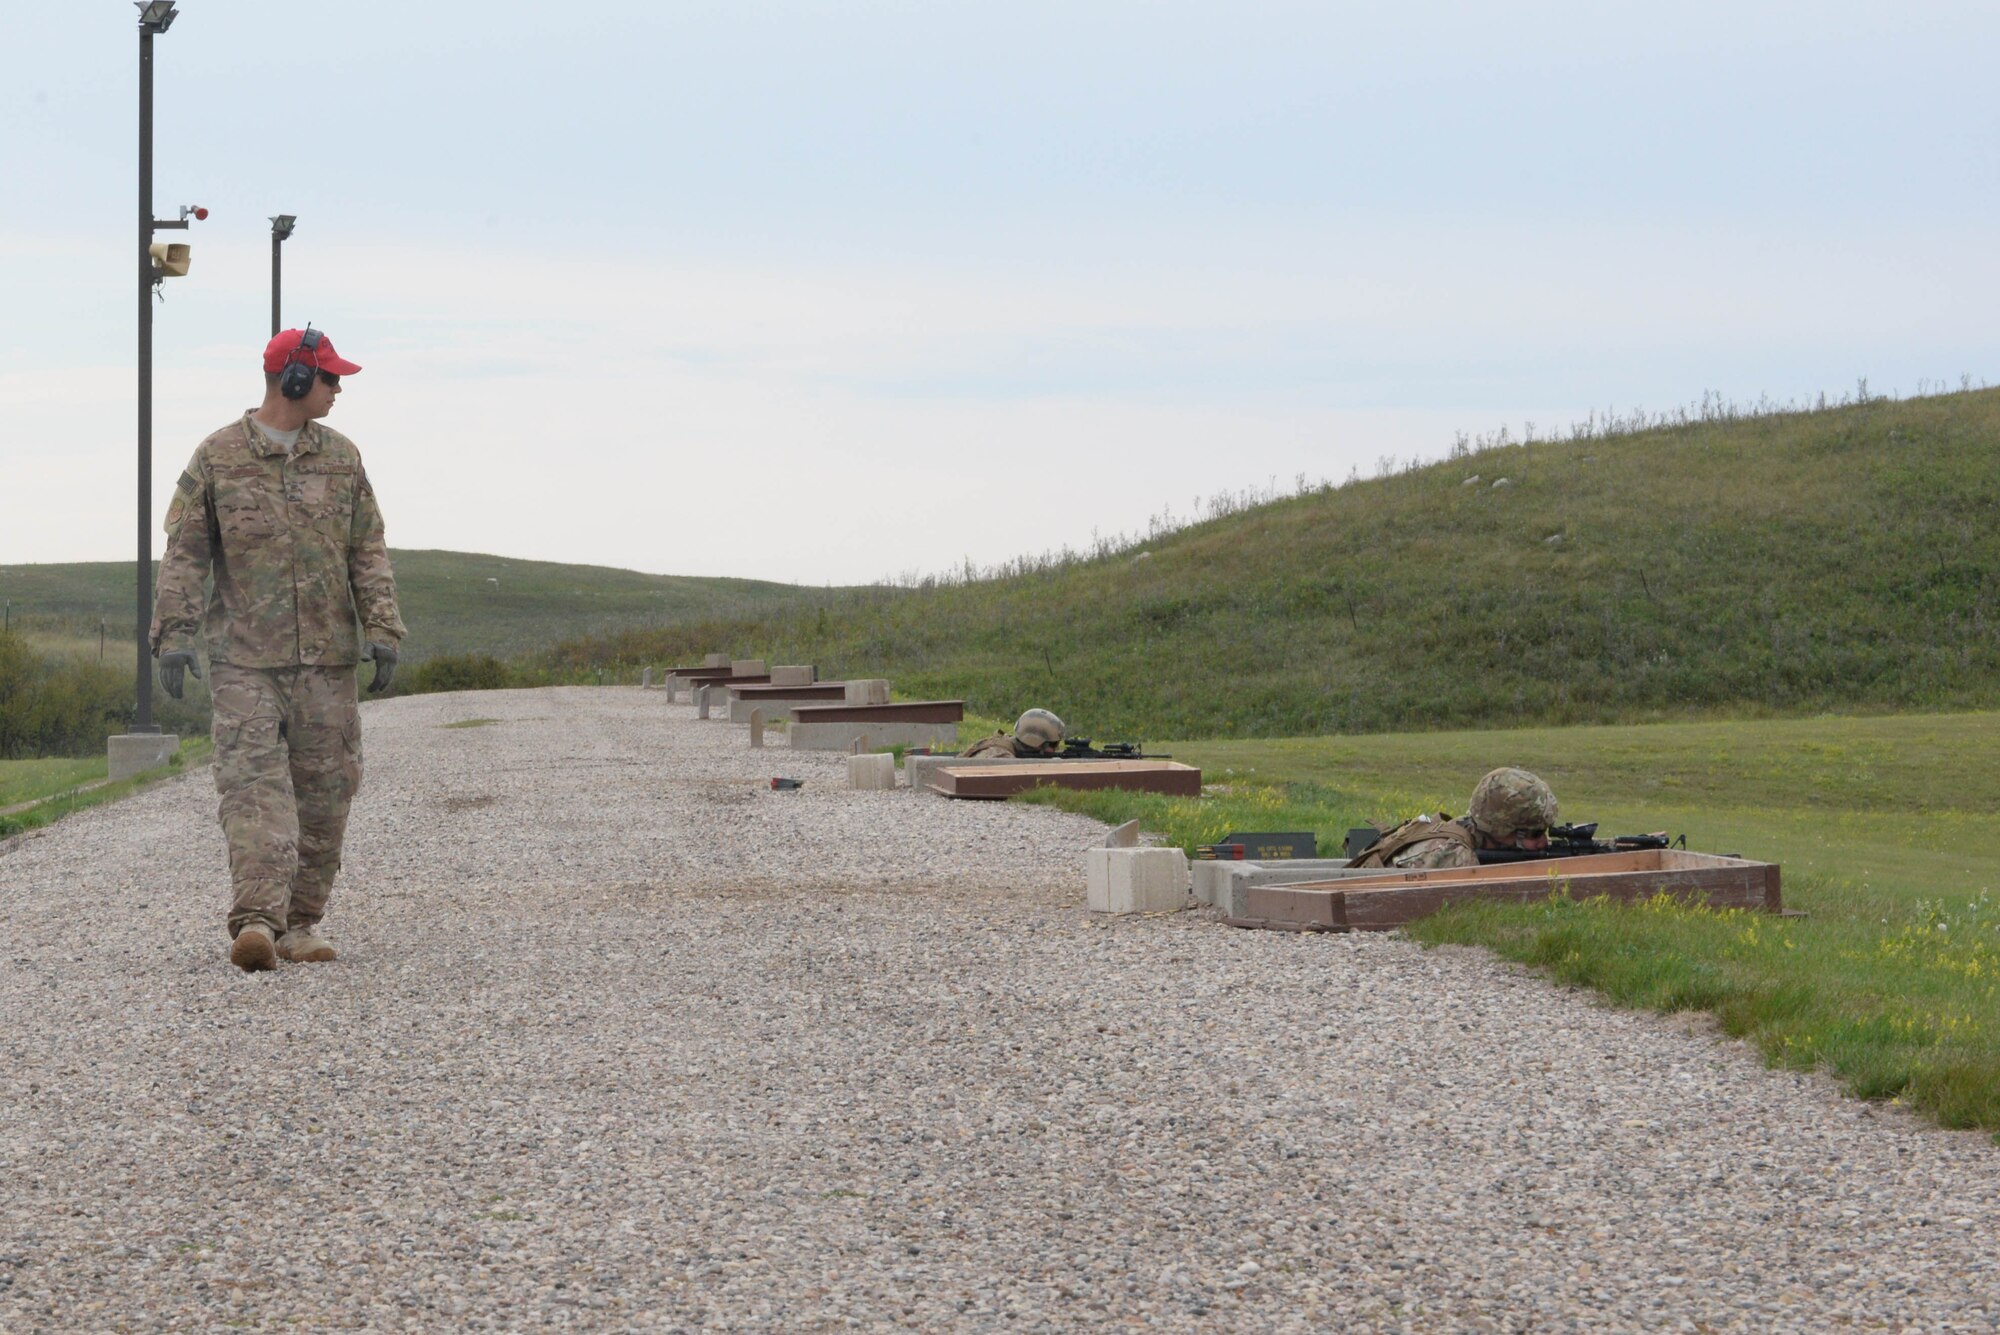 Staff Sgt. Matthew Cinciripini, a security forces instructor assigned to the 91st Security Support Squadron, monitors Airmen at a weapons training range at the Camp Grafton Training Center in Devils Lake, N.D., Sept. 7, 2016. Live-fire training was one of many courses that were part of a three-day training event to prepare Airmen for real life scenarios and improve combat capabilities. (U.S. Air Force photo/Airman 1st Class Jessica Weissman)